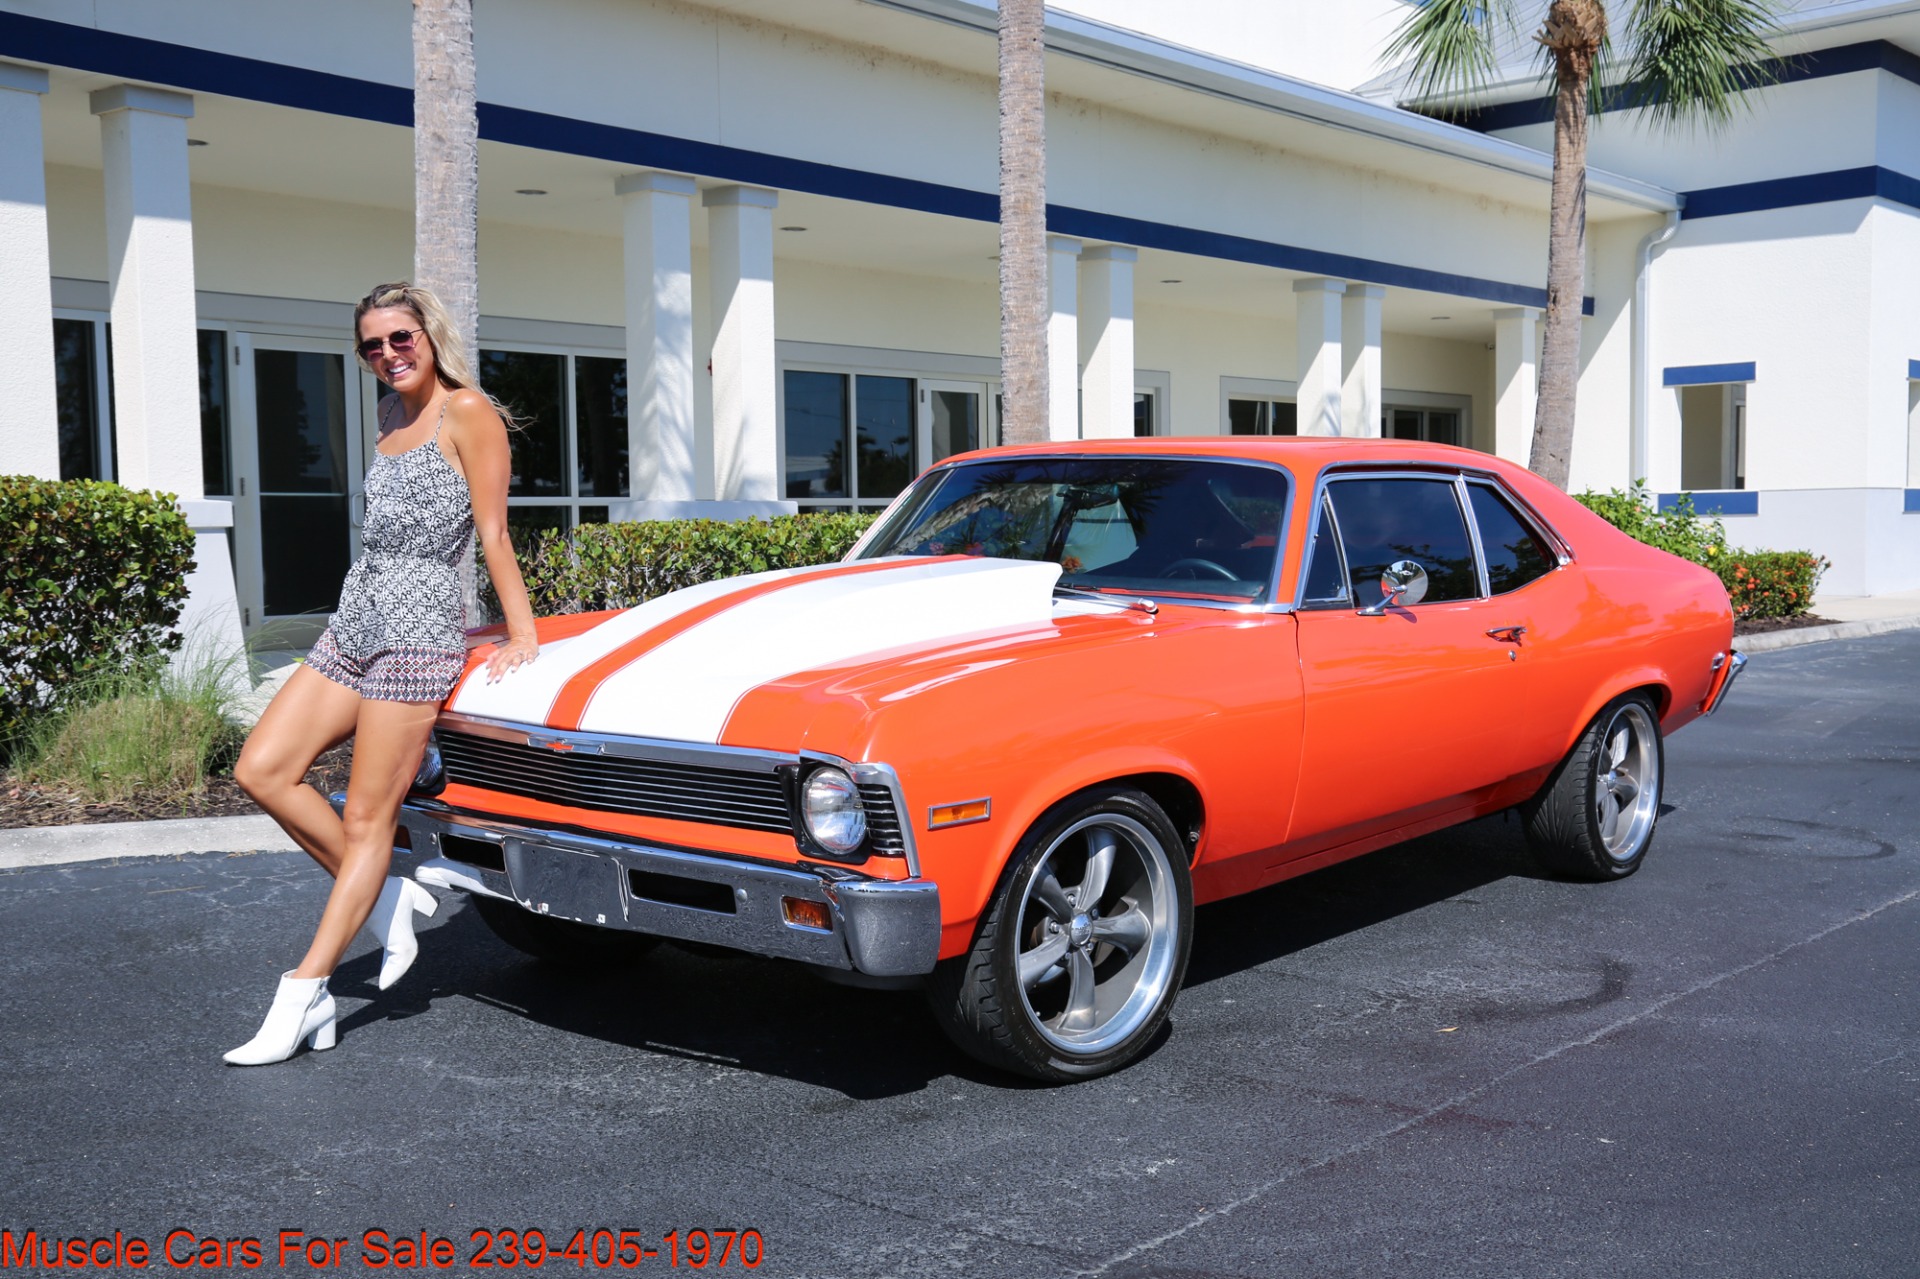 Used 1972 Chevrolet Nova LS Corvette Swap for sale $33,000 at Muscle Cars for Sale Inc. in Fort Myers FL 33912 1